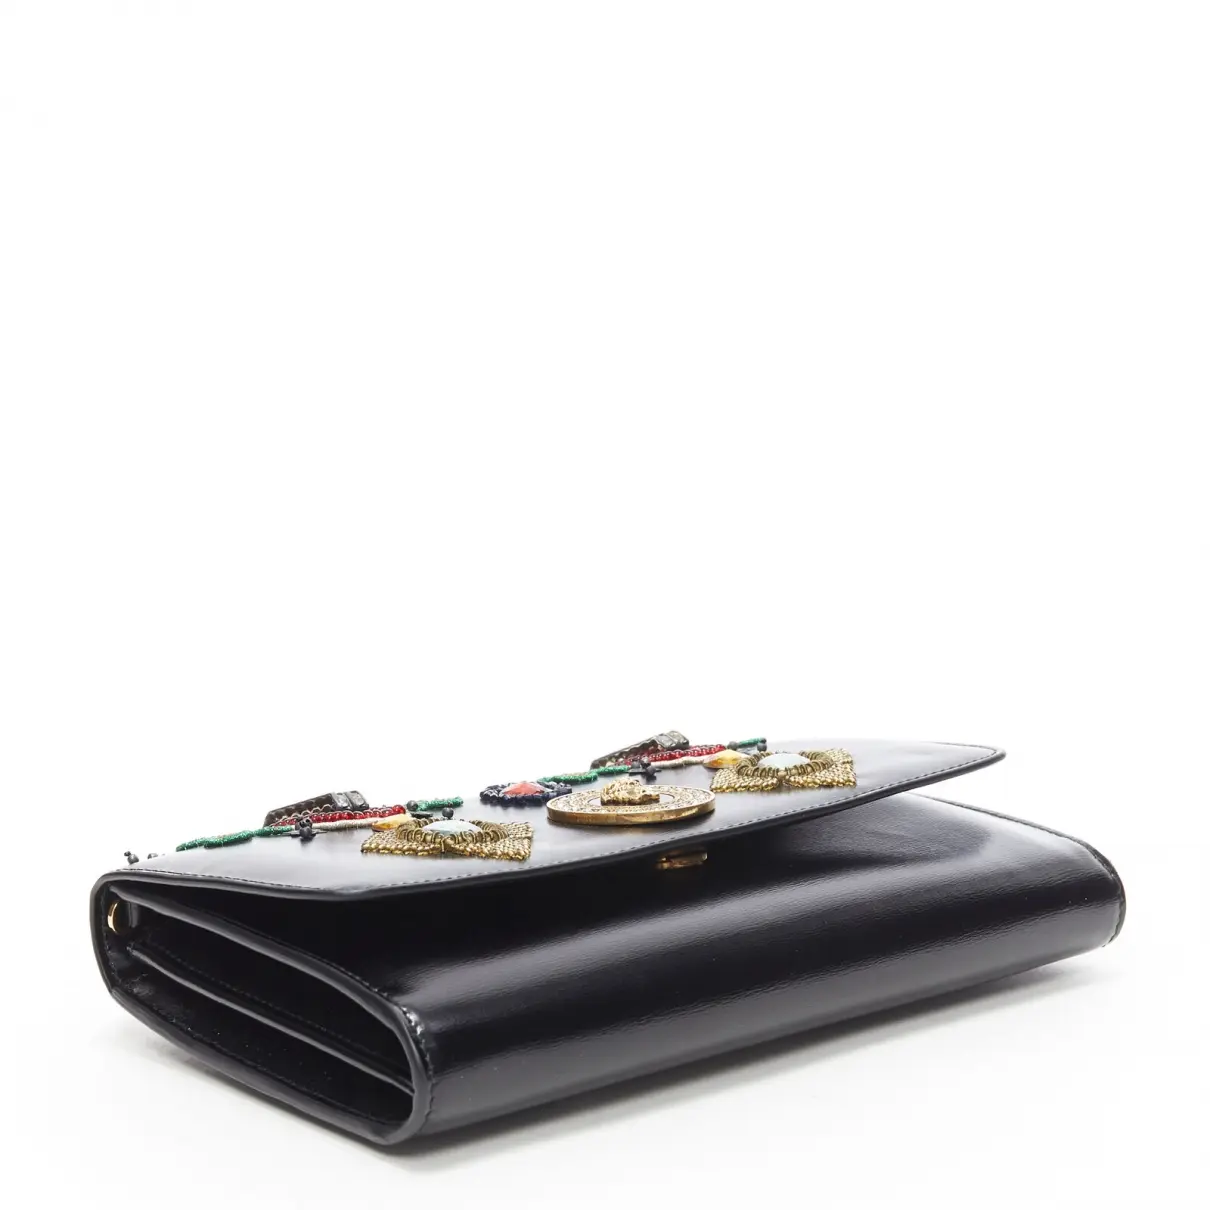 Leather clutch bag Versace